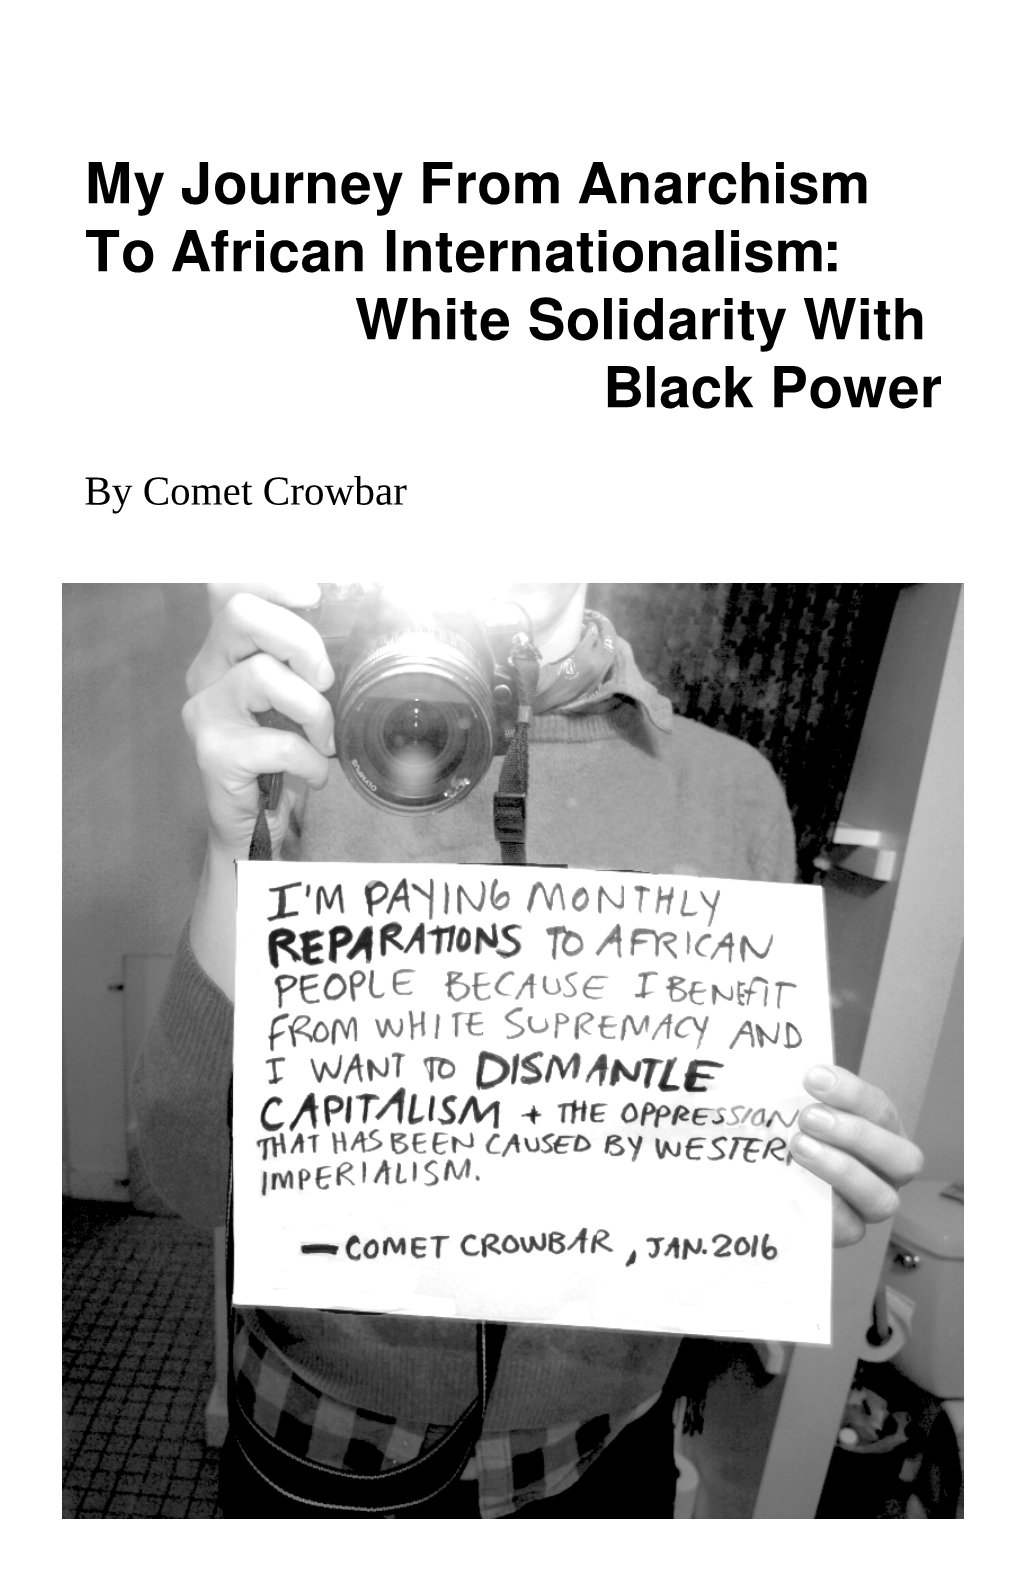 My Journey from Anarchism to African Internationalism: White Solidarity with Black Power